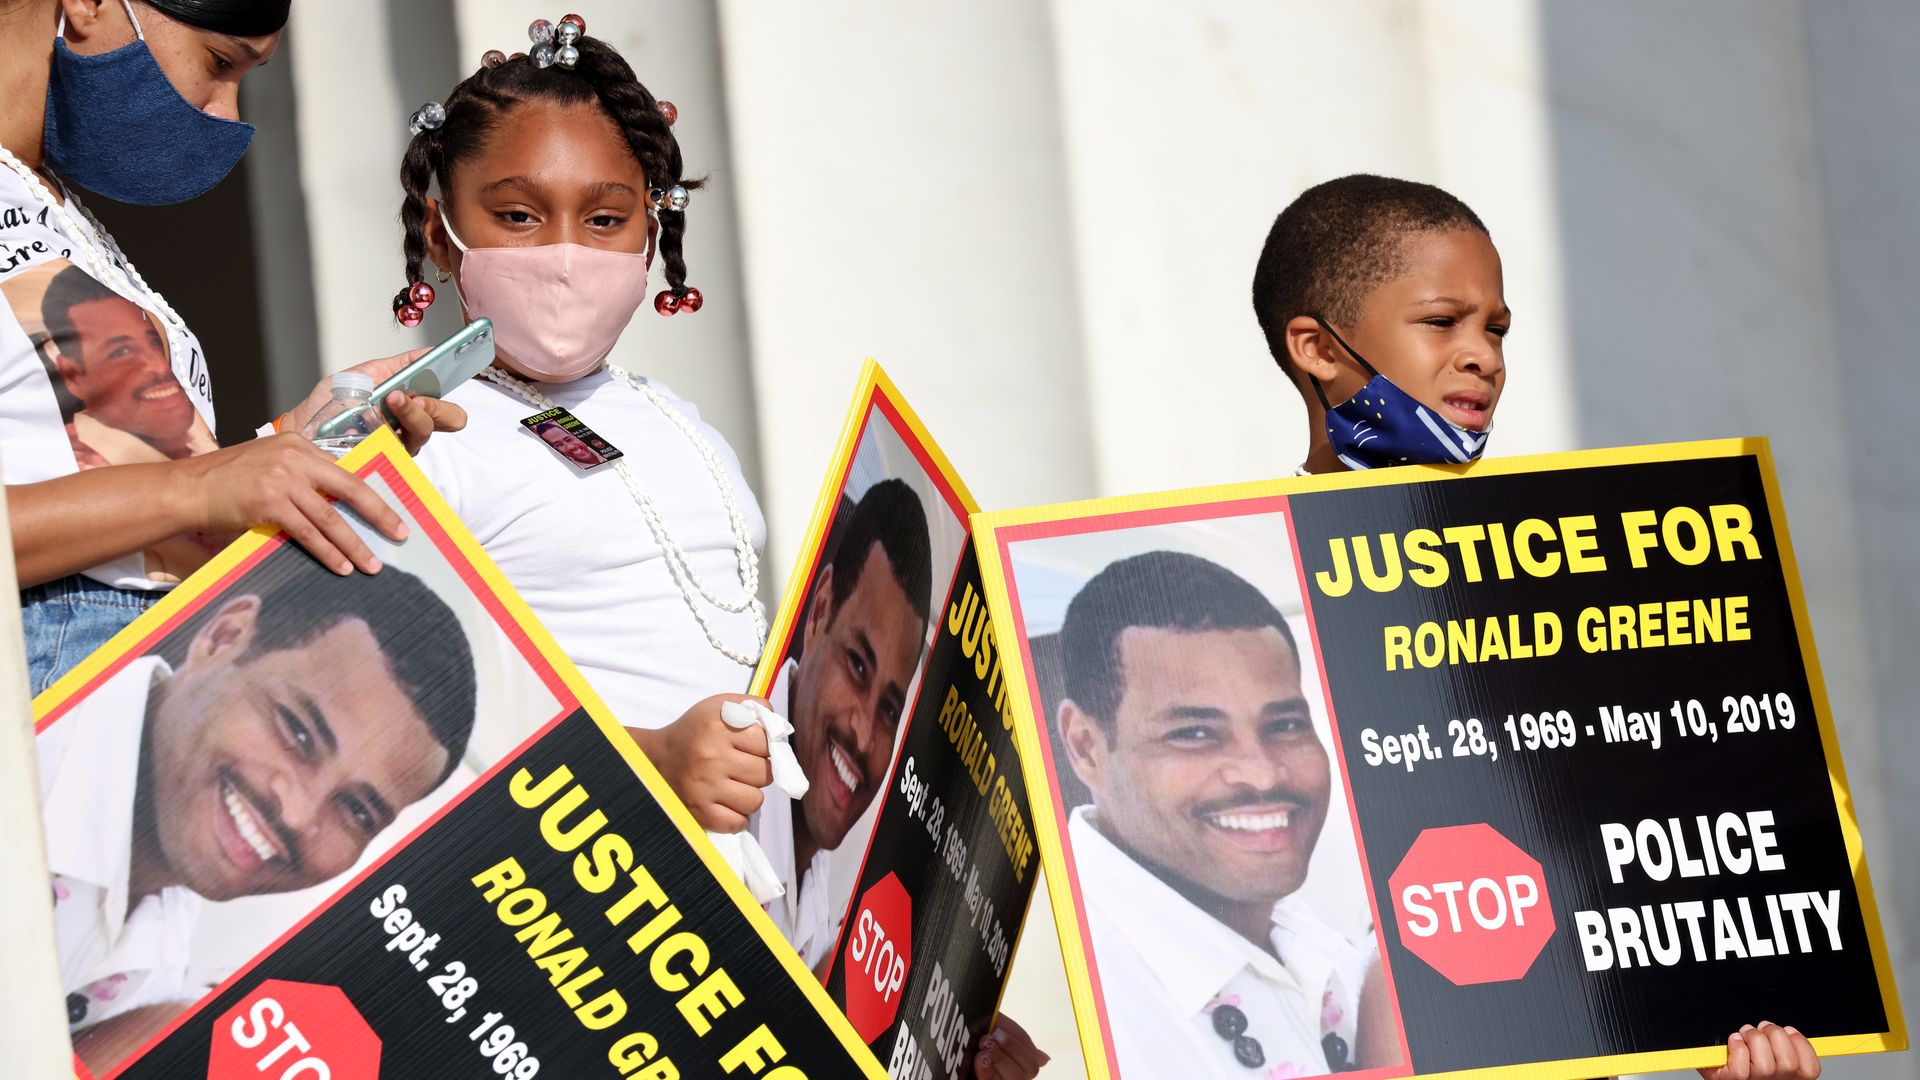 Family members of Ronald Greene listen to speakers as they gather at the Lincoln Memorial for the March on Washington August 28, 2020 in Washington, DC.